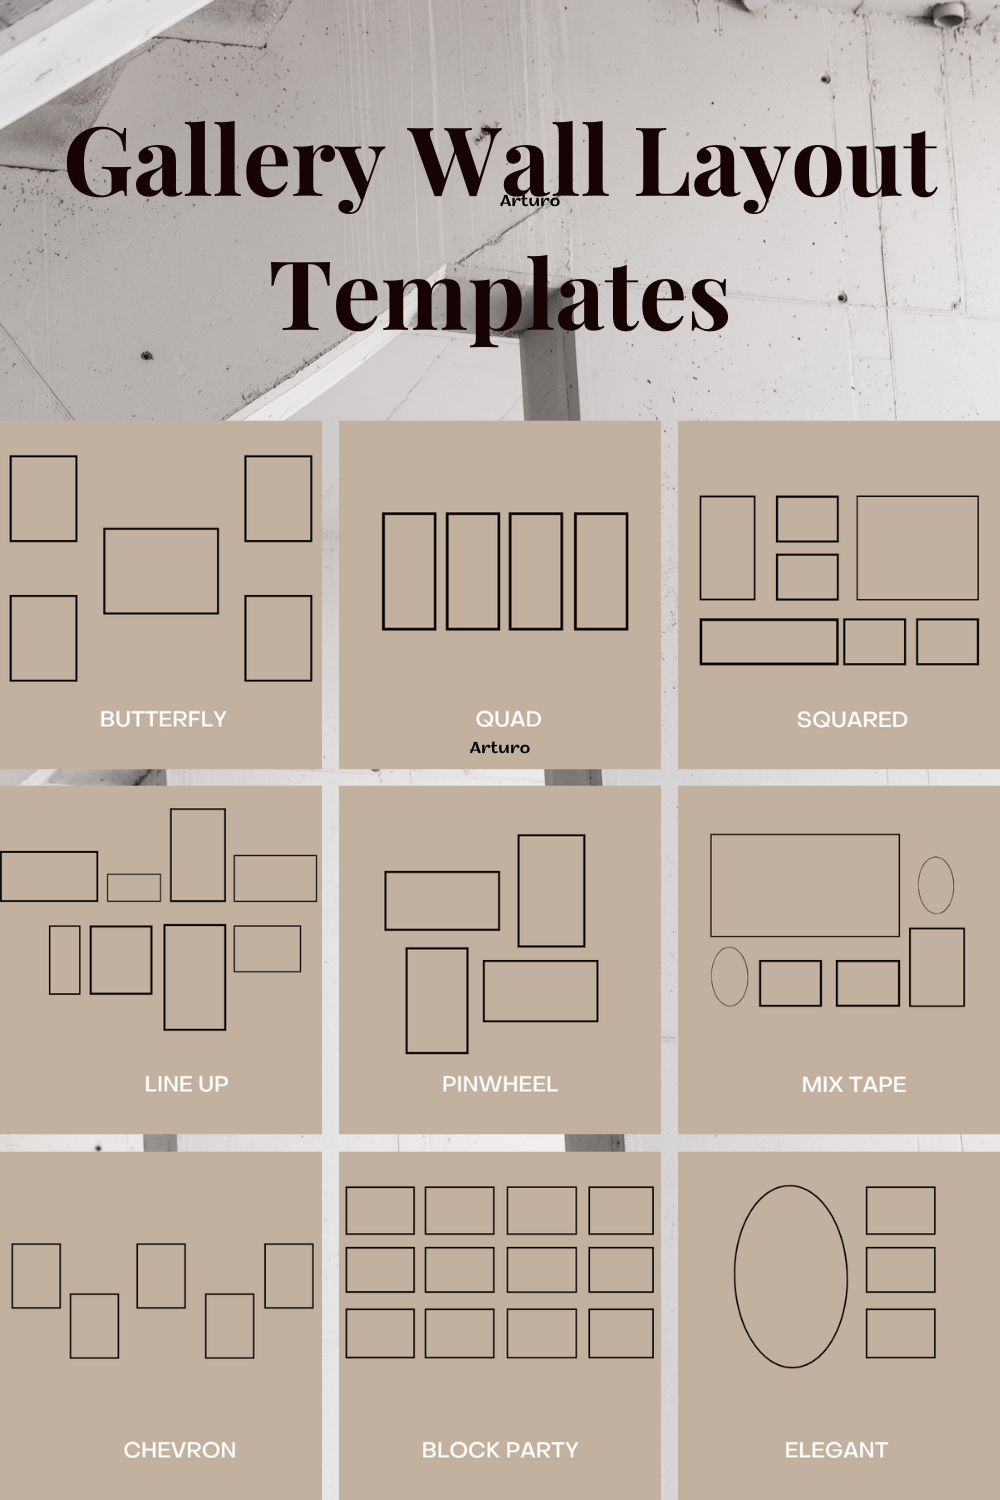 Gallery wall layout templates